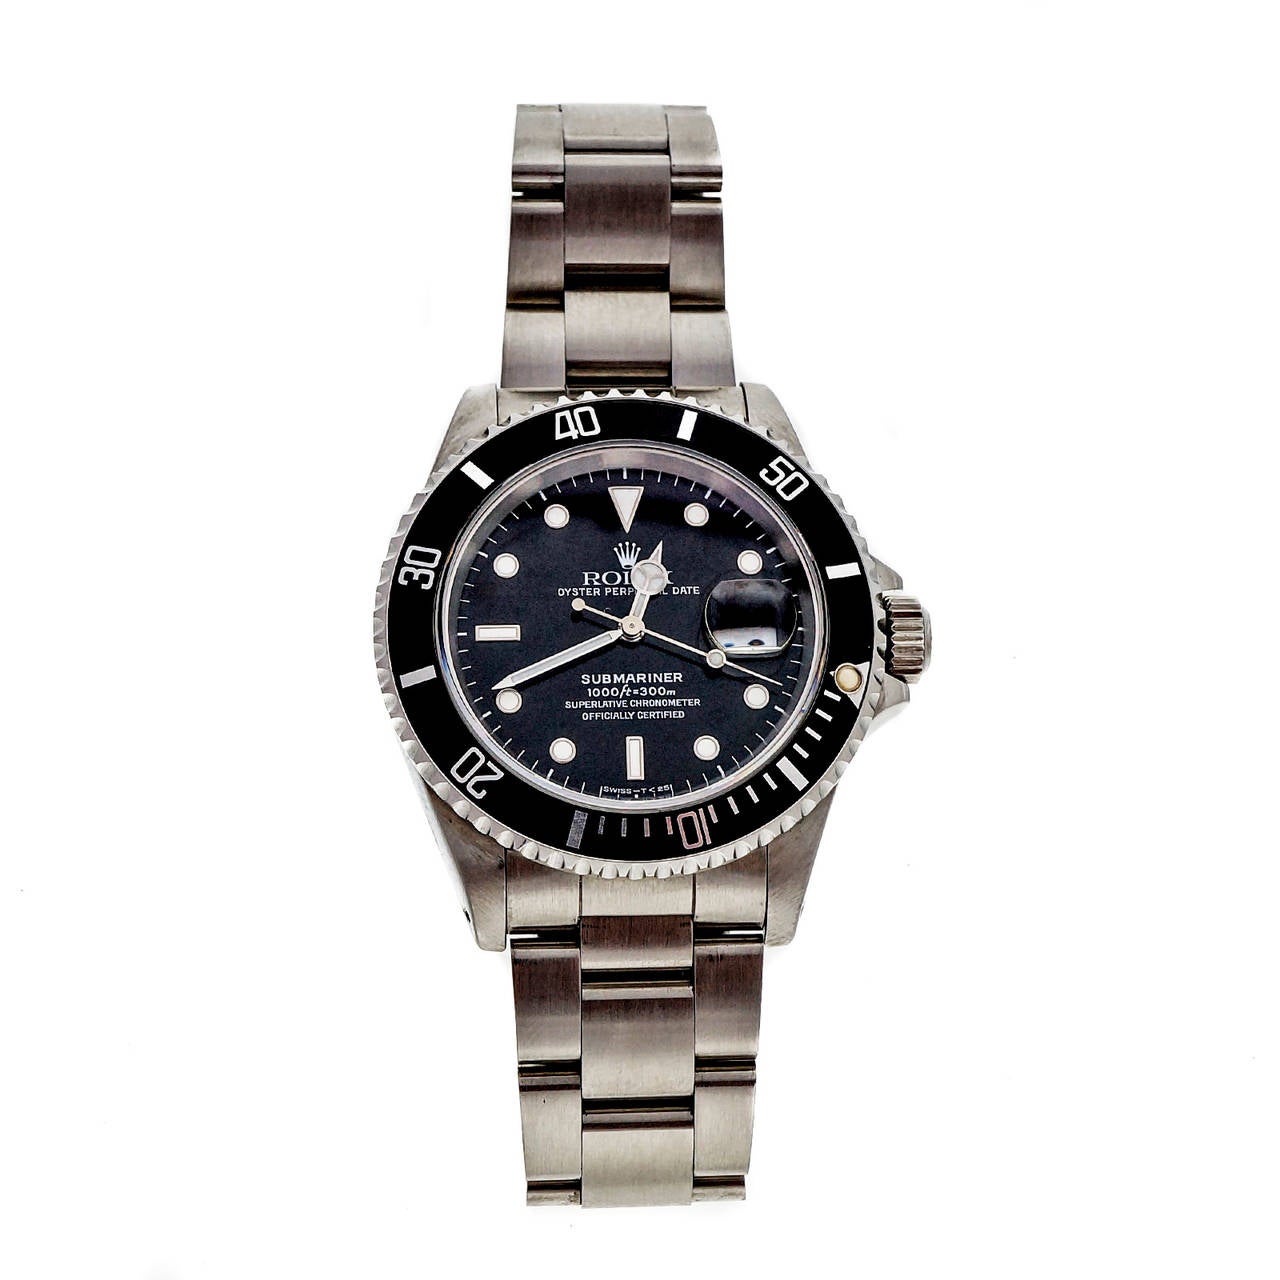 Fantastic condition almost as new classic Rolex Submariner model 16610 has proven to be the durable work horse of the submariner line. Case, band, crystal and insert all excellent.

Stainless Steel 
Length: 47mm 
Width: 38mm 
Bracelet width at